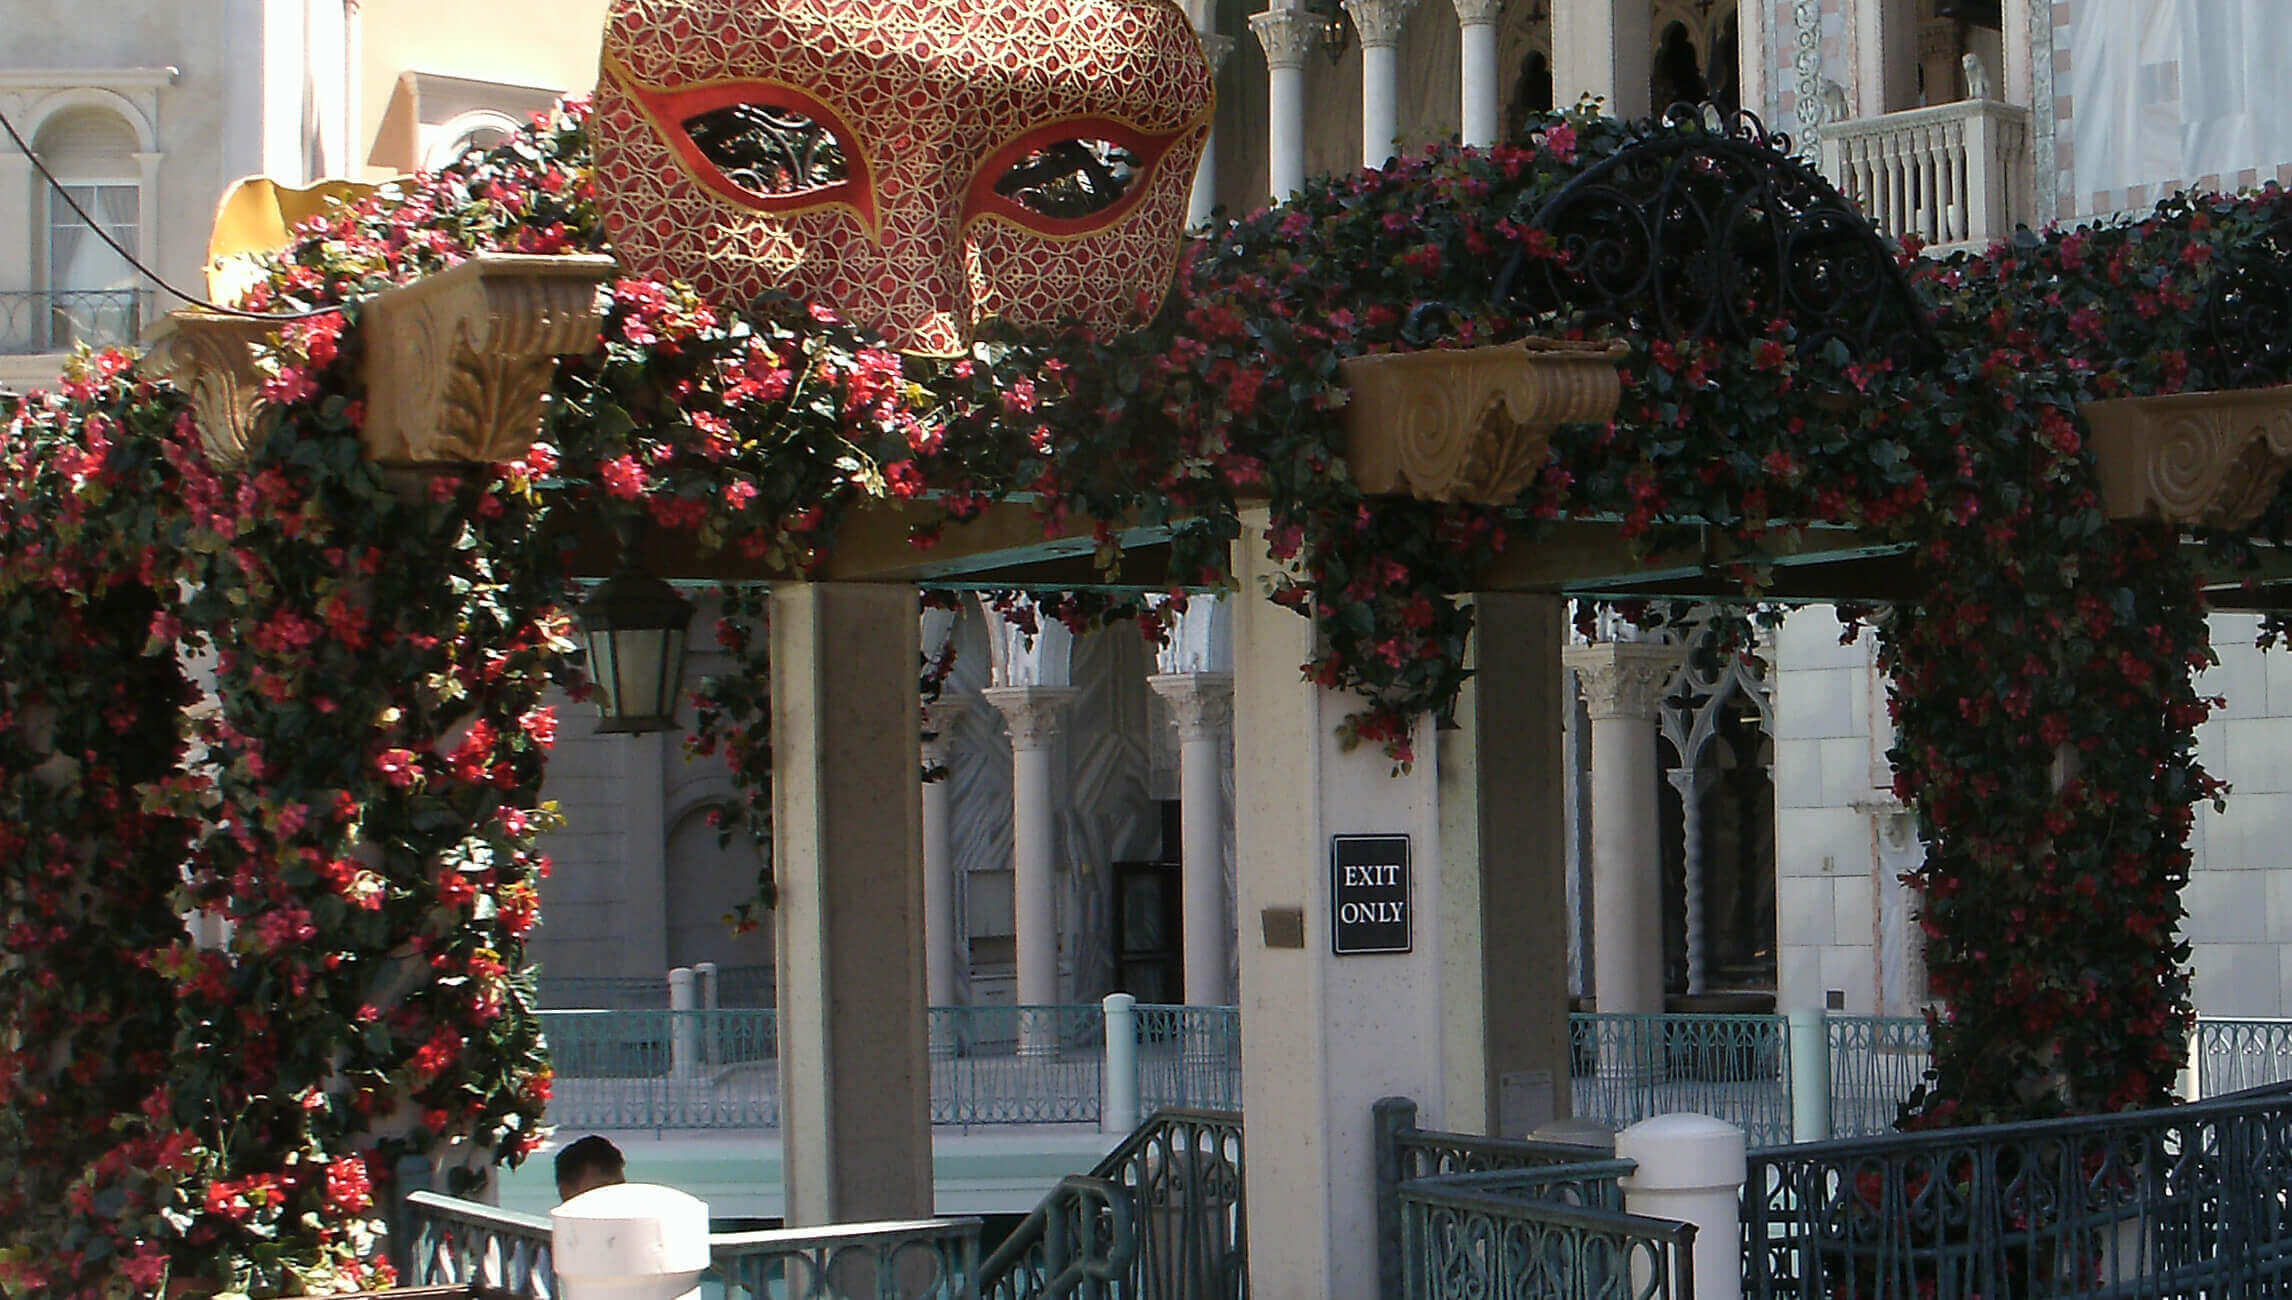 Bougainvilleas grace the columns and the top of a trellis at the gondola gateway in the Venetian Hotel & Casino